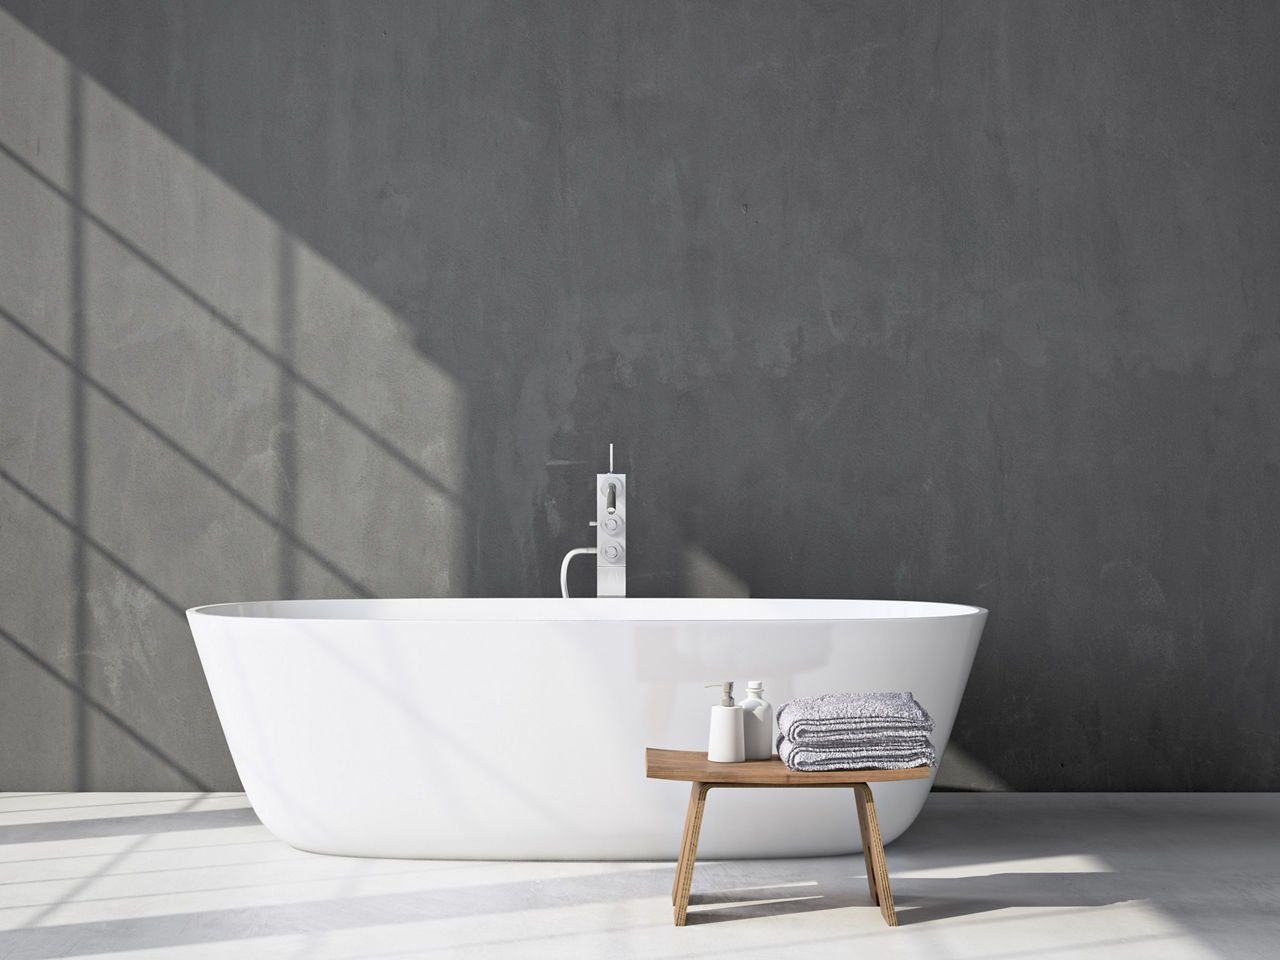 White enamel bathtub against grey wall with wooden stool holding towels and toiletry bottles